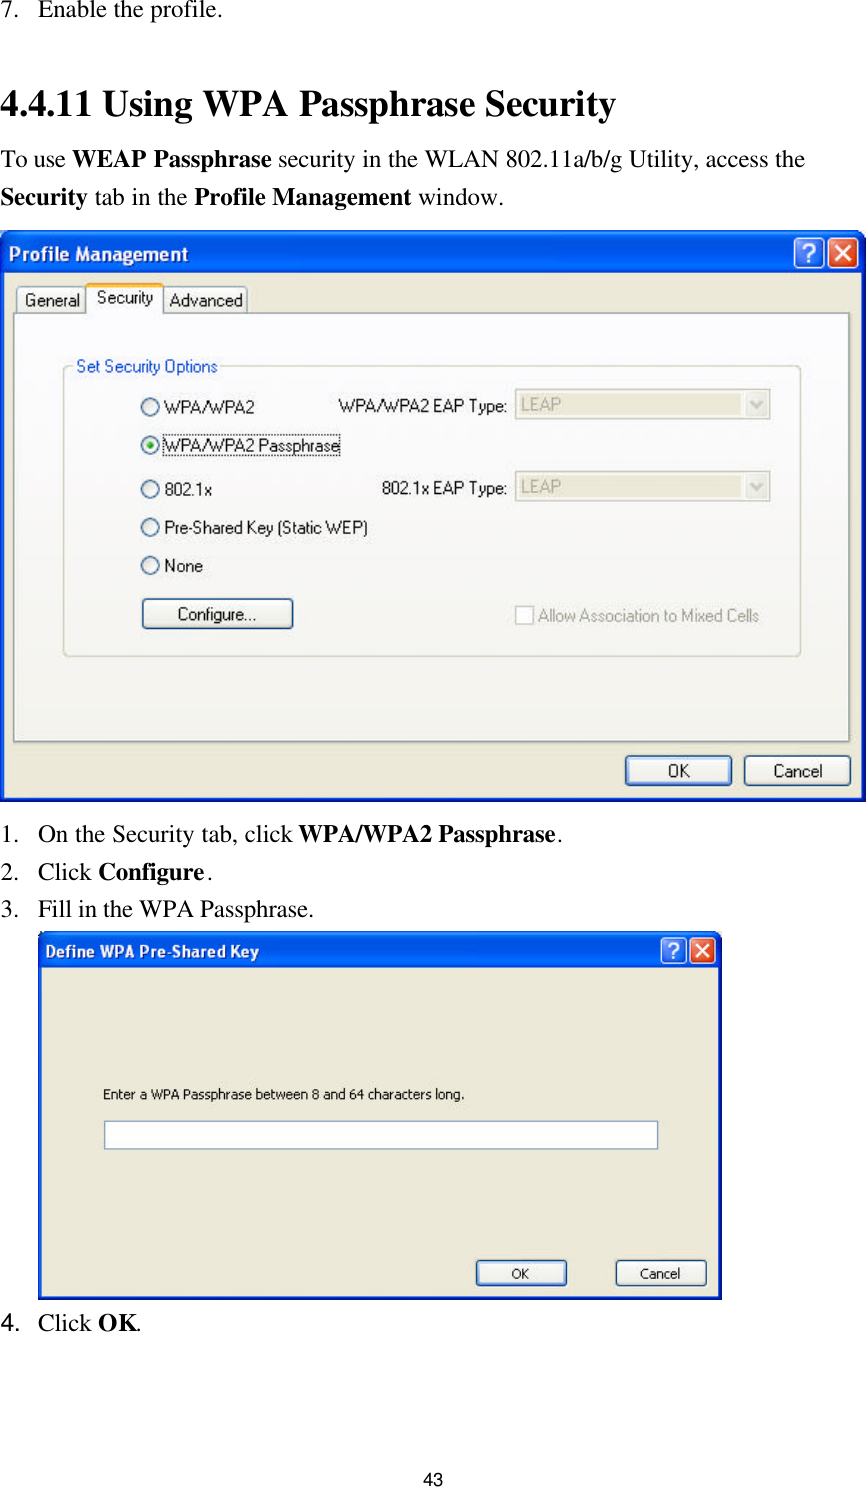 43 7. Enable the profile.  4.4.11 Using WPA Passphrase Security To use WEAP Passphrase security in the WLAN 802.11a/b/g Utility, access the Security tab in the Profile Management window.  1. On the Security tab, click WPA/WPA2 Passphrase. 2. Click Configure. 3. Fill in the WPA Passphrase.  4. Click OK.  